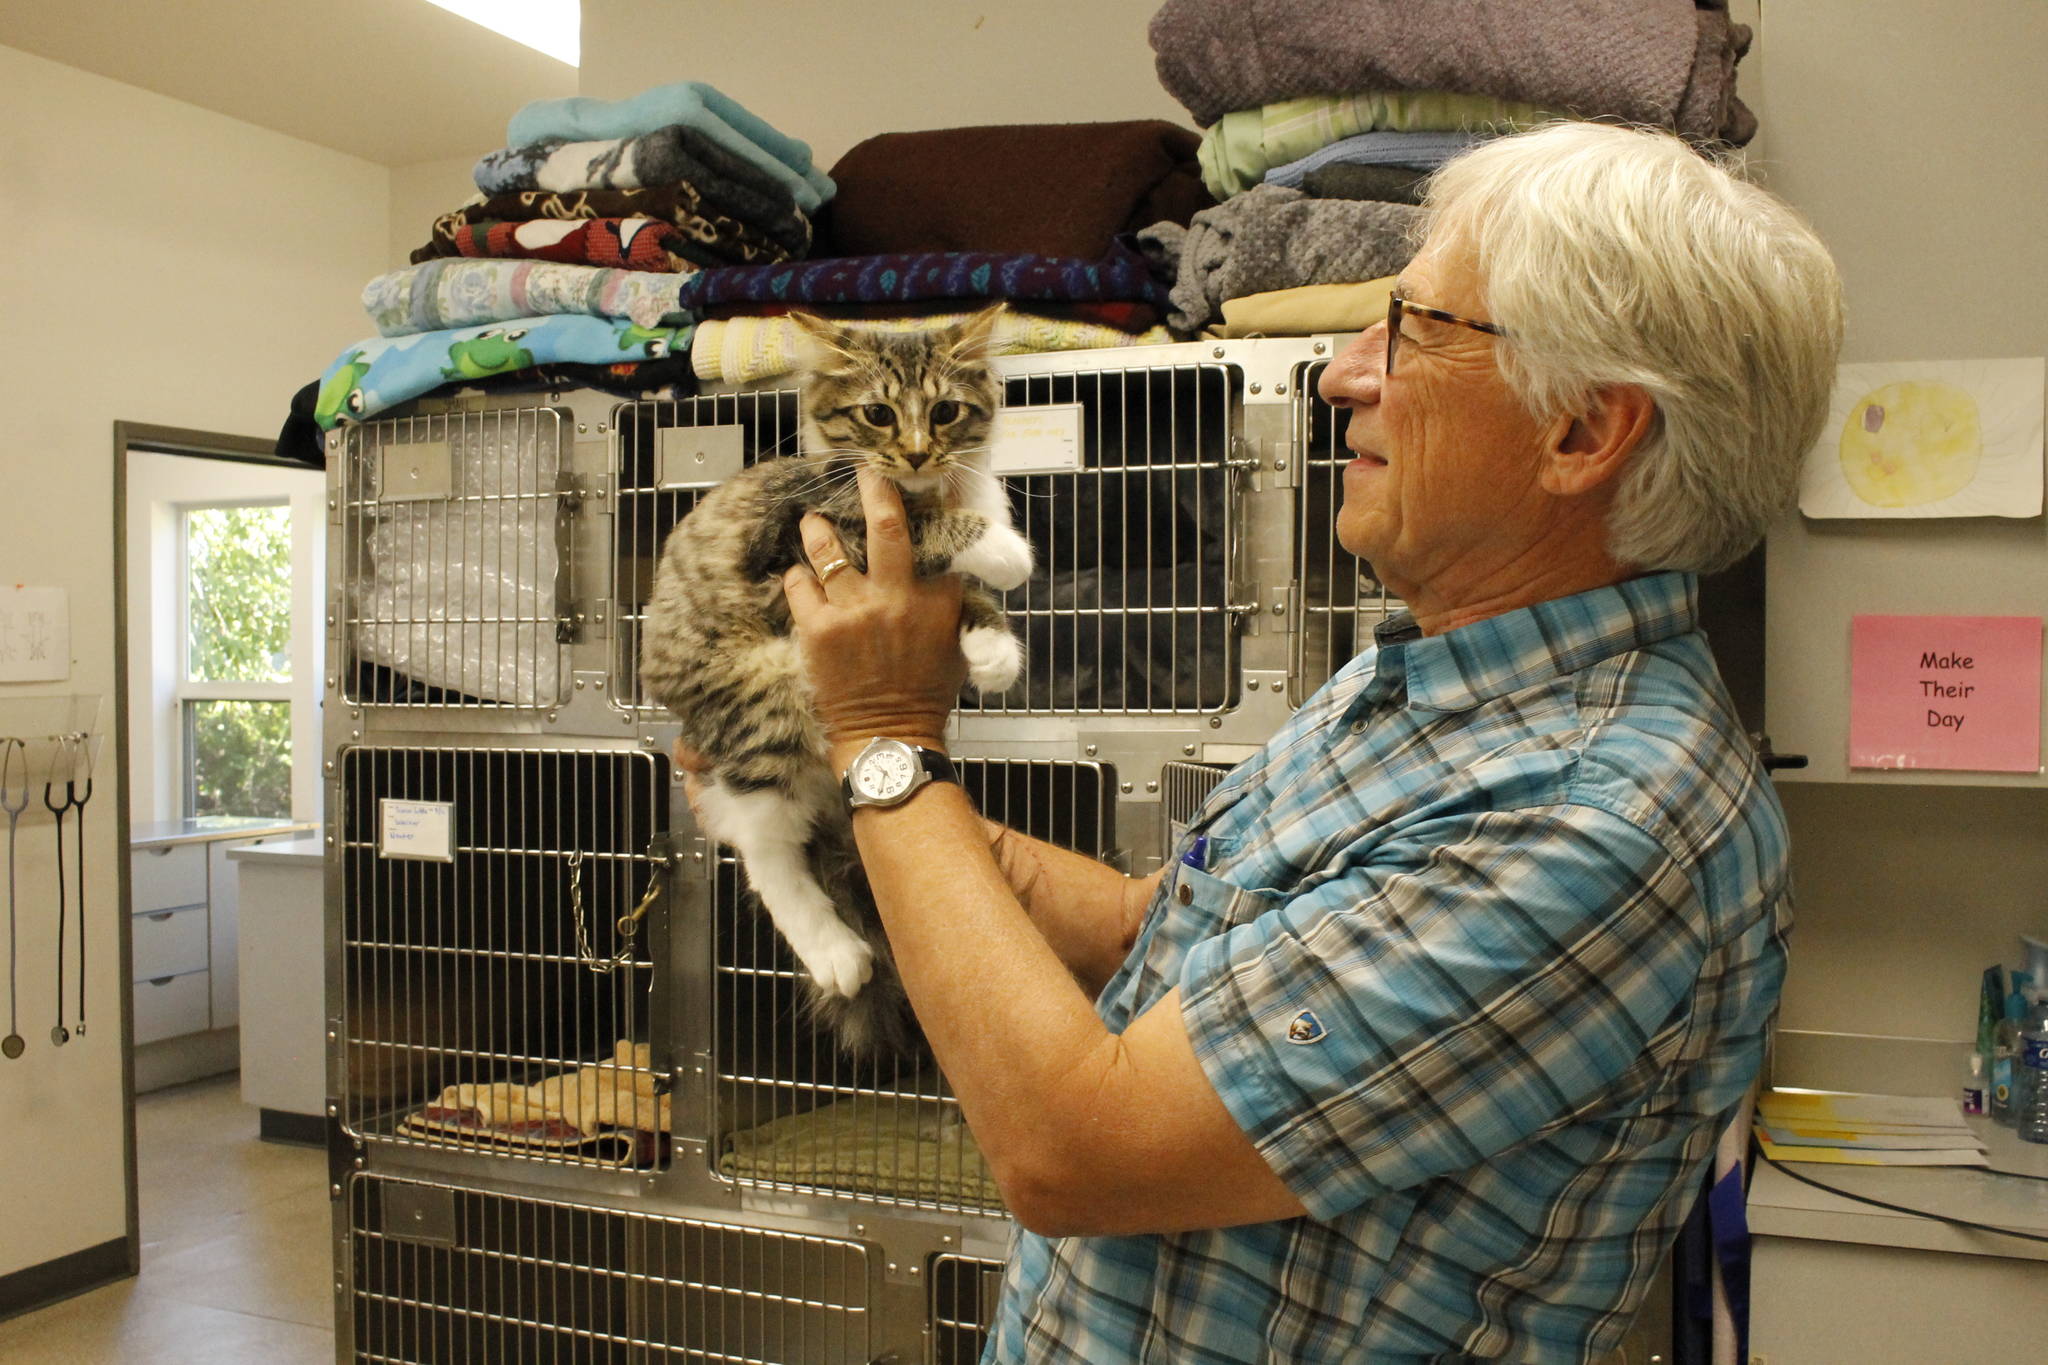 Veterinarian David Parent holds Tommy the cat. Although he is known for treating wild birds, Parent has tended to just as many domestic animals. (Photo by Kira Erickson/South Whidbey Record)